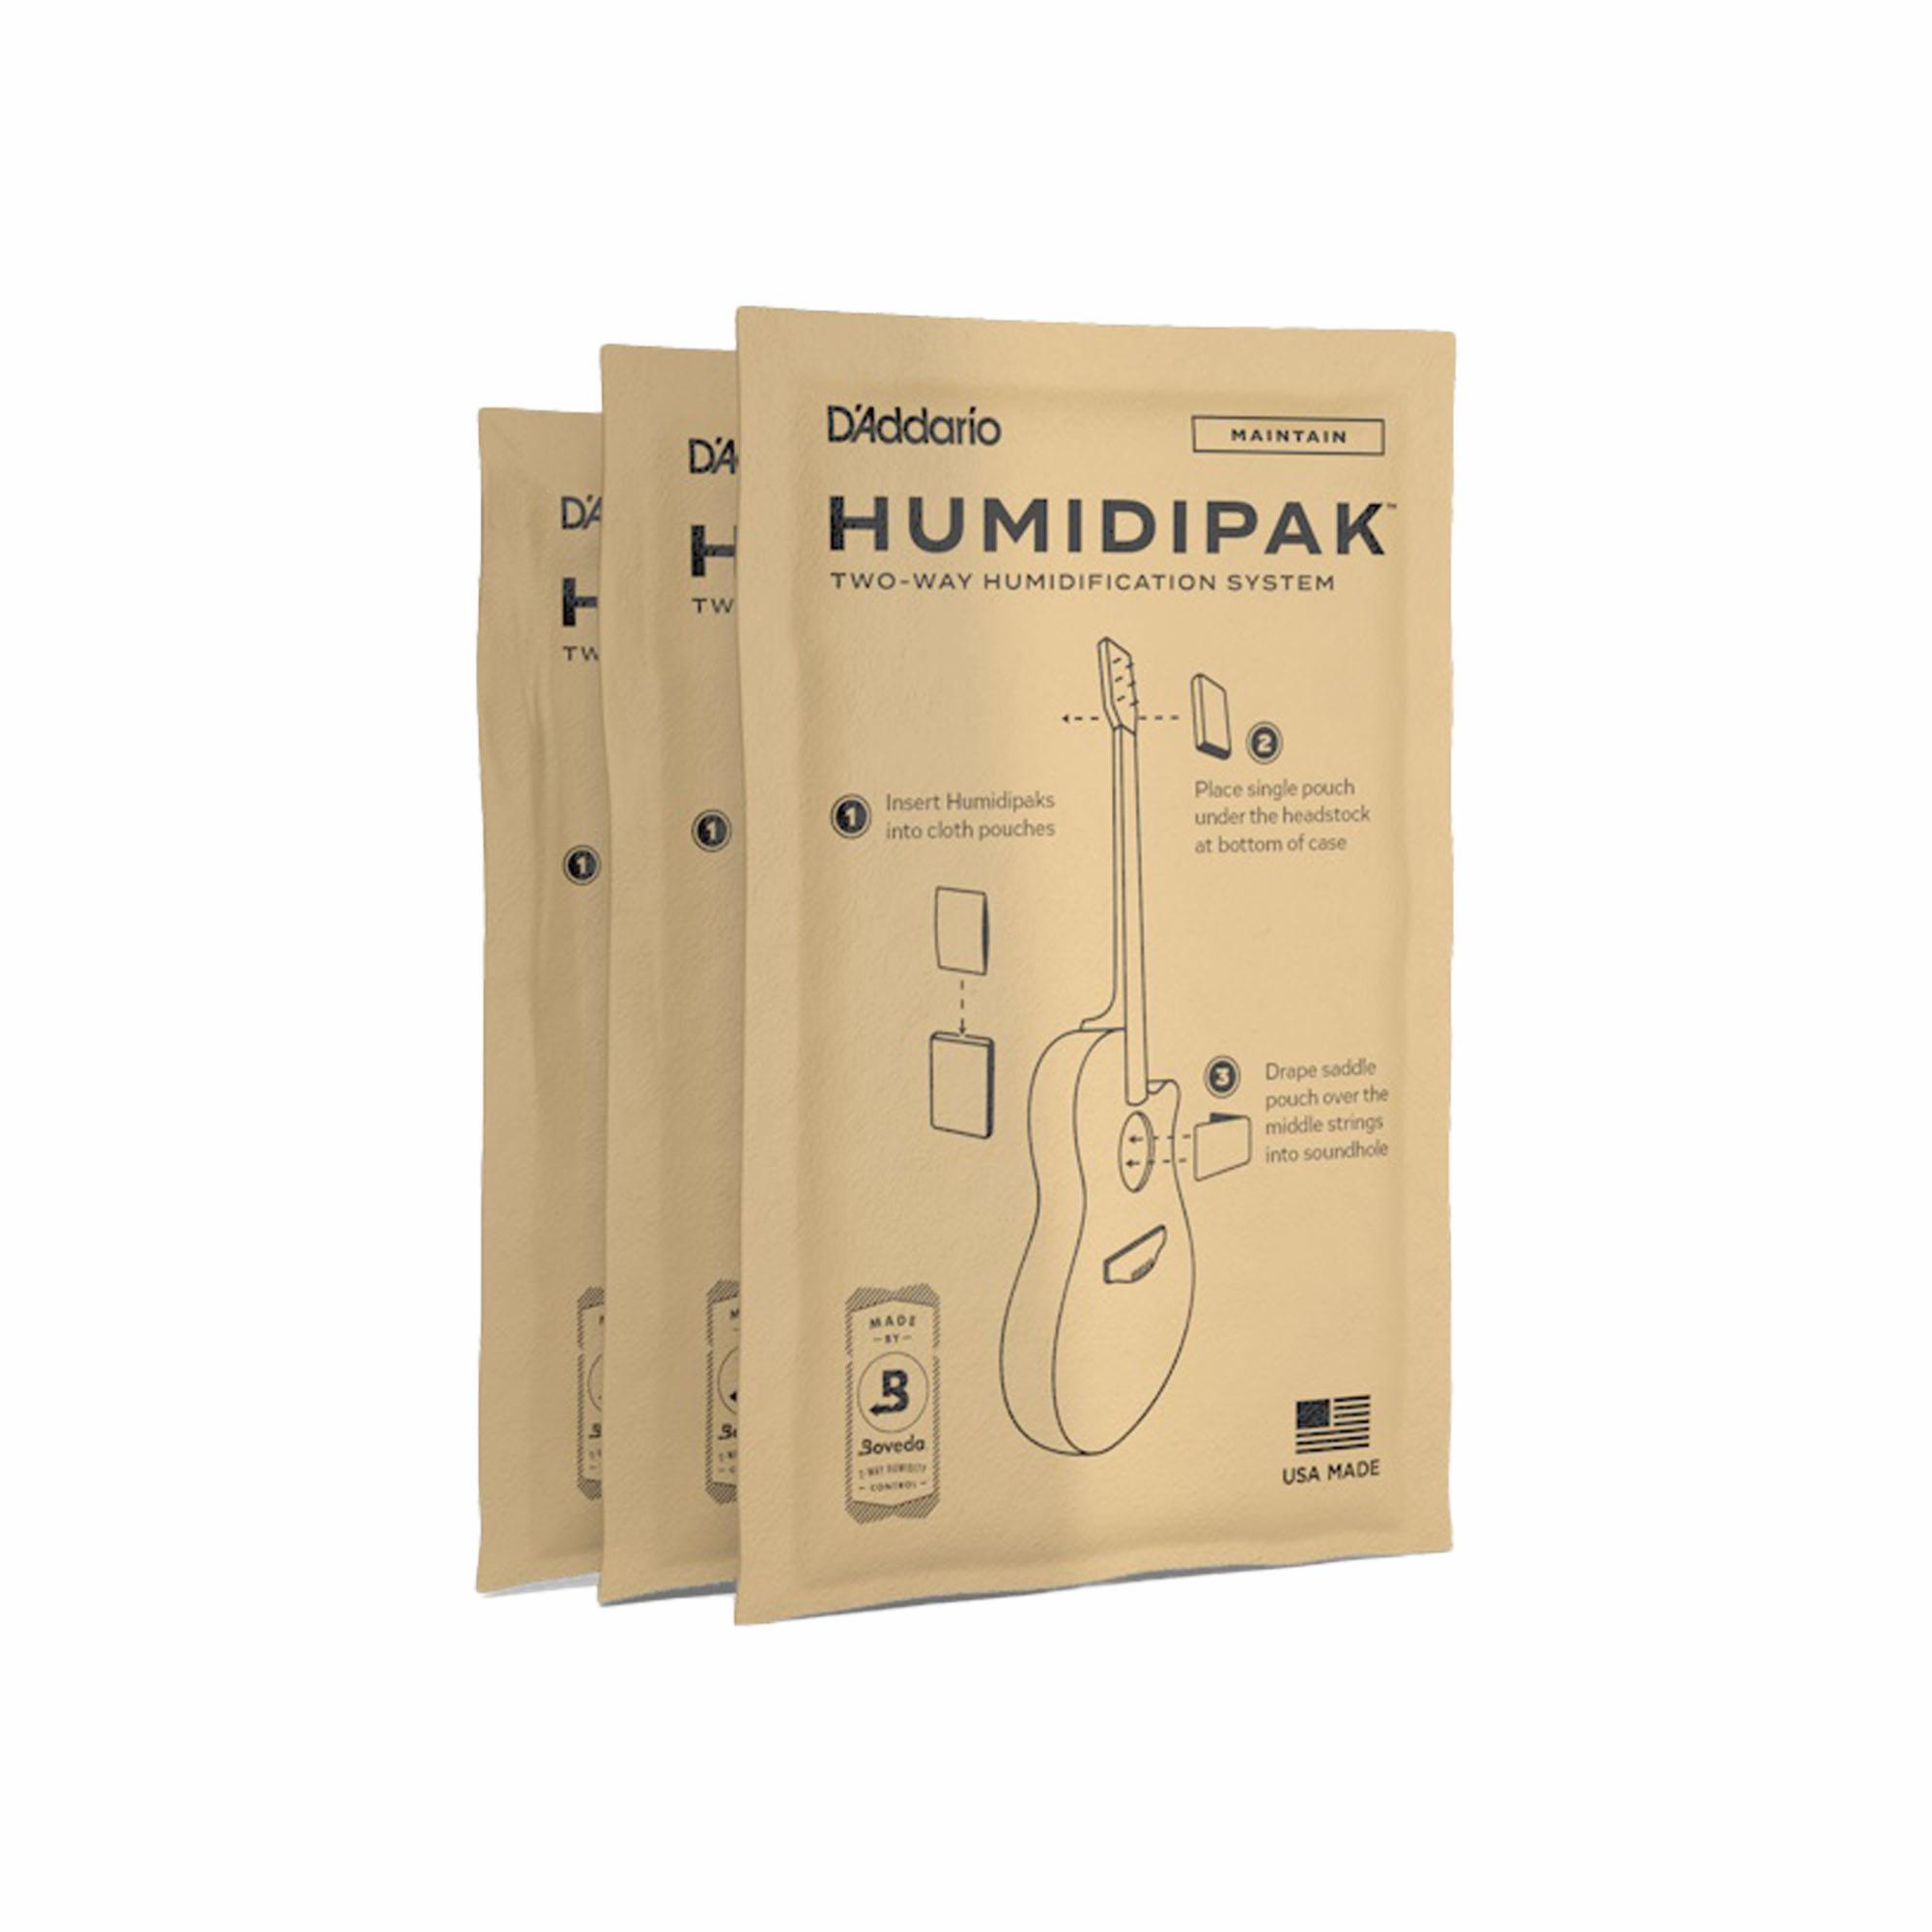 Replacement Humidipaks (PW-HPRP-03)